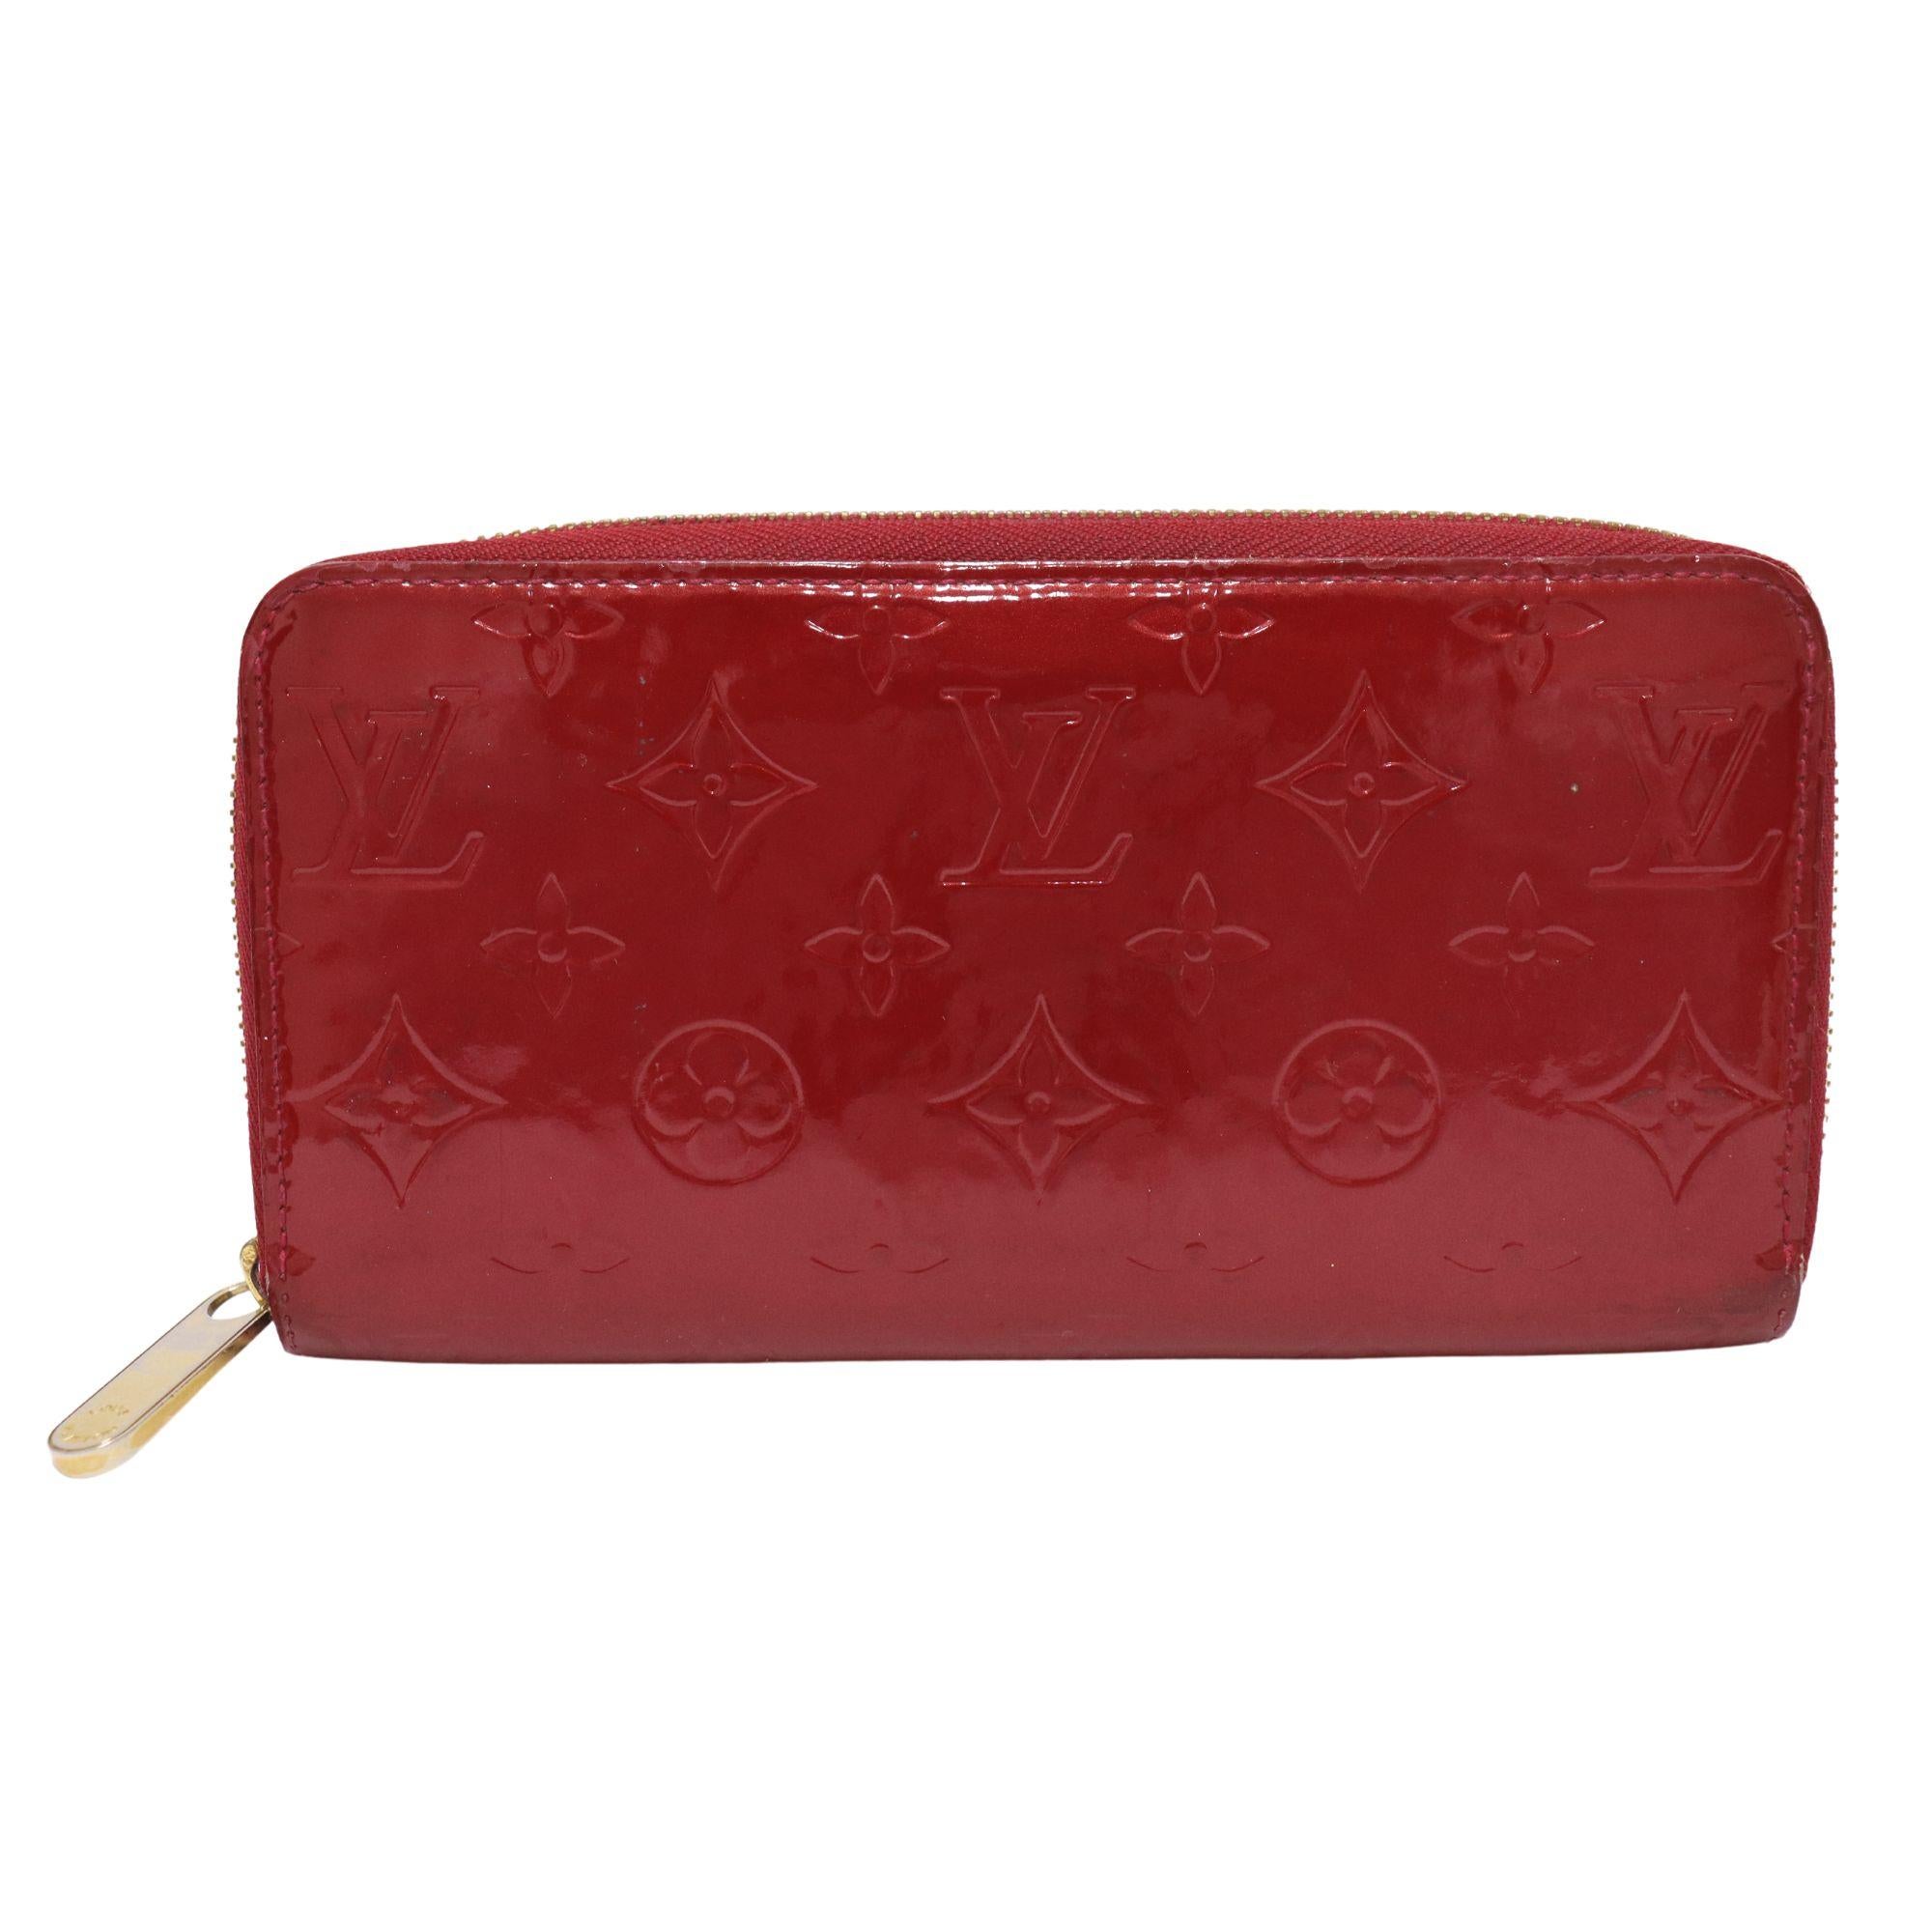 Louis Vuitton red vernis zippy wallet. Features gold tone hardware. Full zip around opens to red leather interior with 8 card slots. Middle zipped coin compartment, and multiple bill pockets.

Measurements:
Height: 10cm
Width: 19cm
Depth: